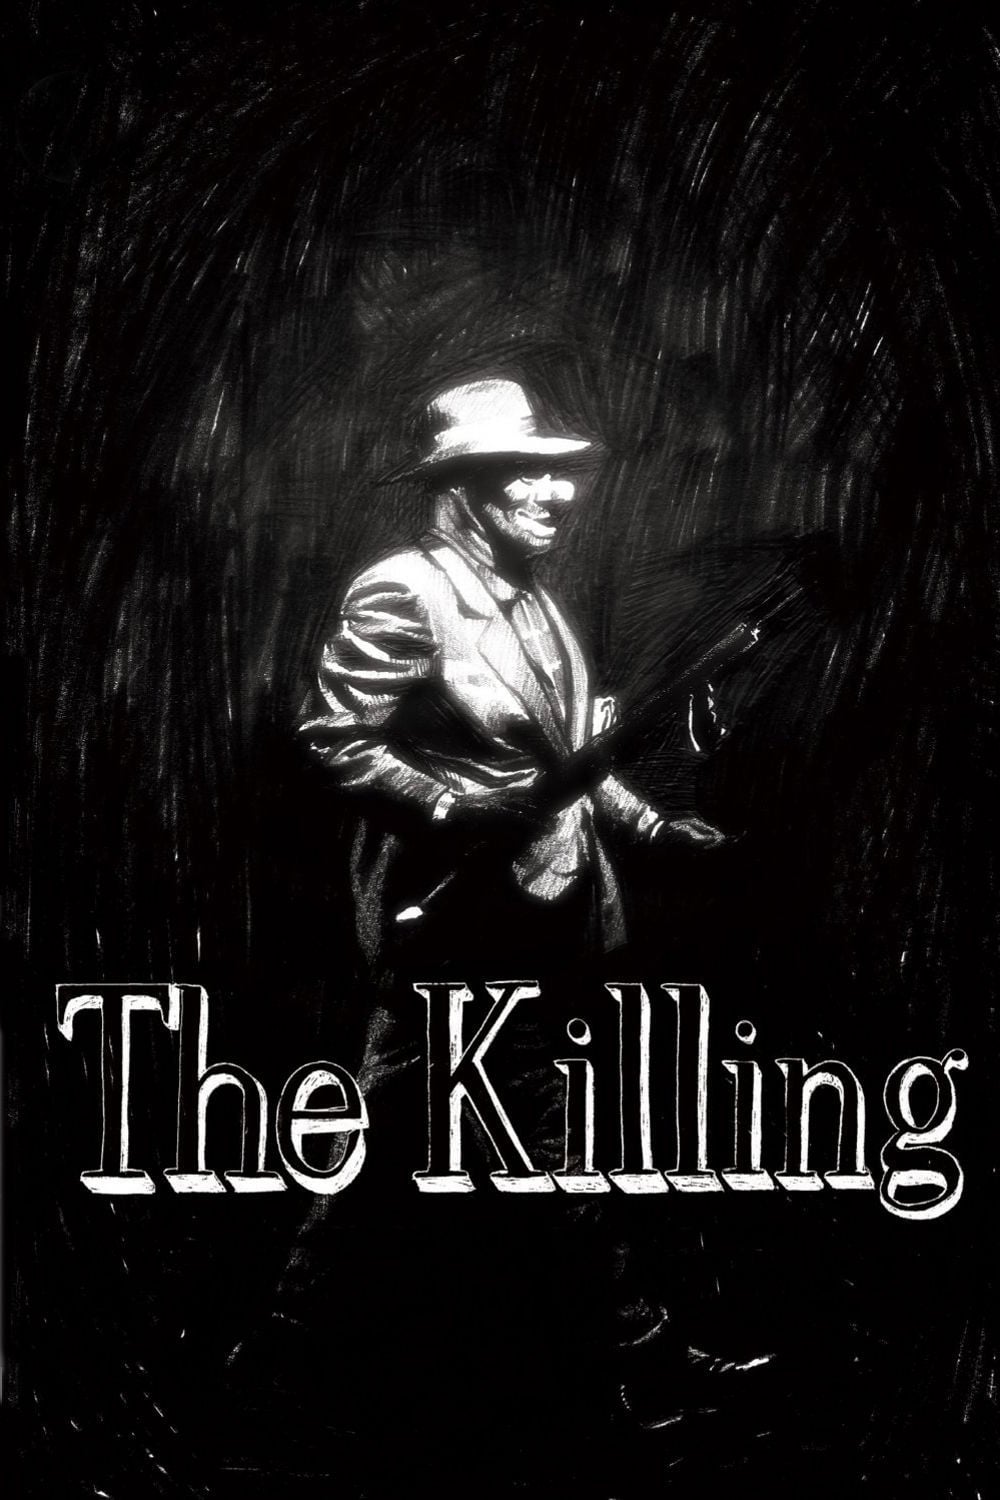 Poster for the movie "The Killing"